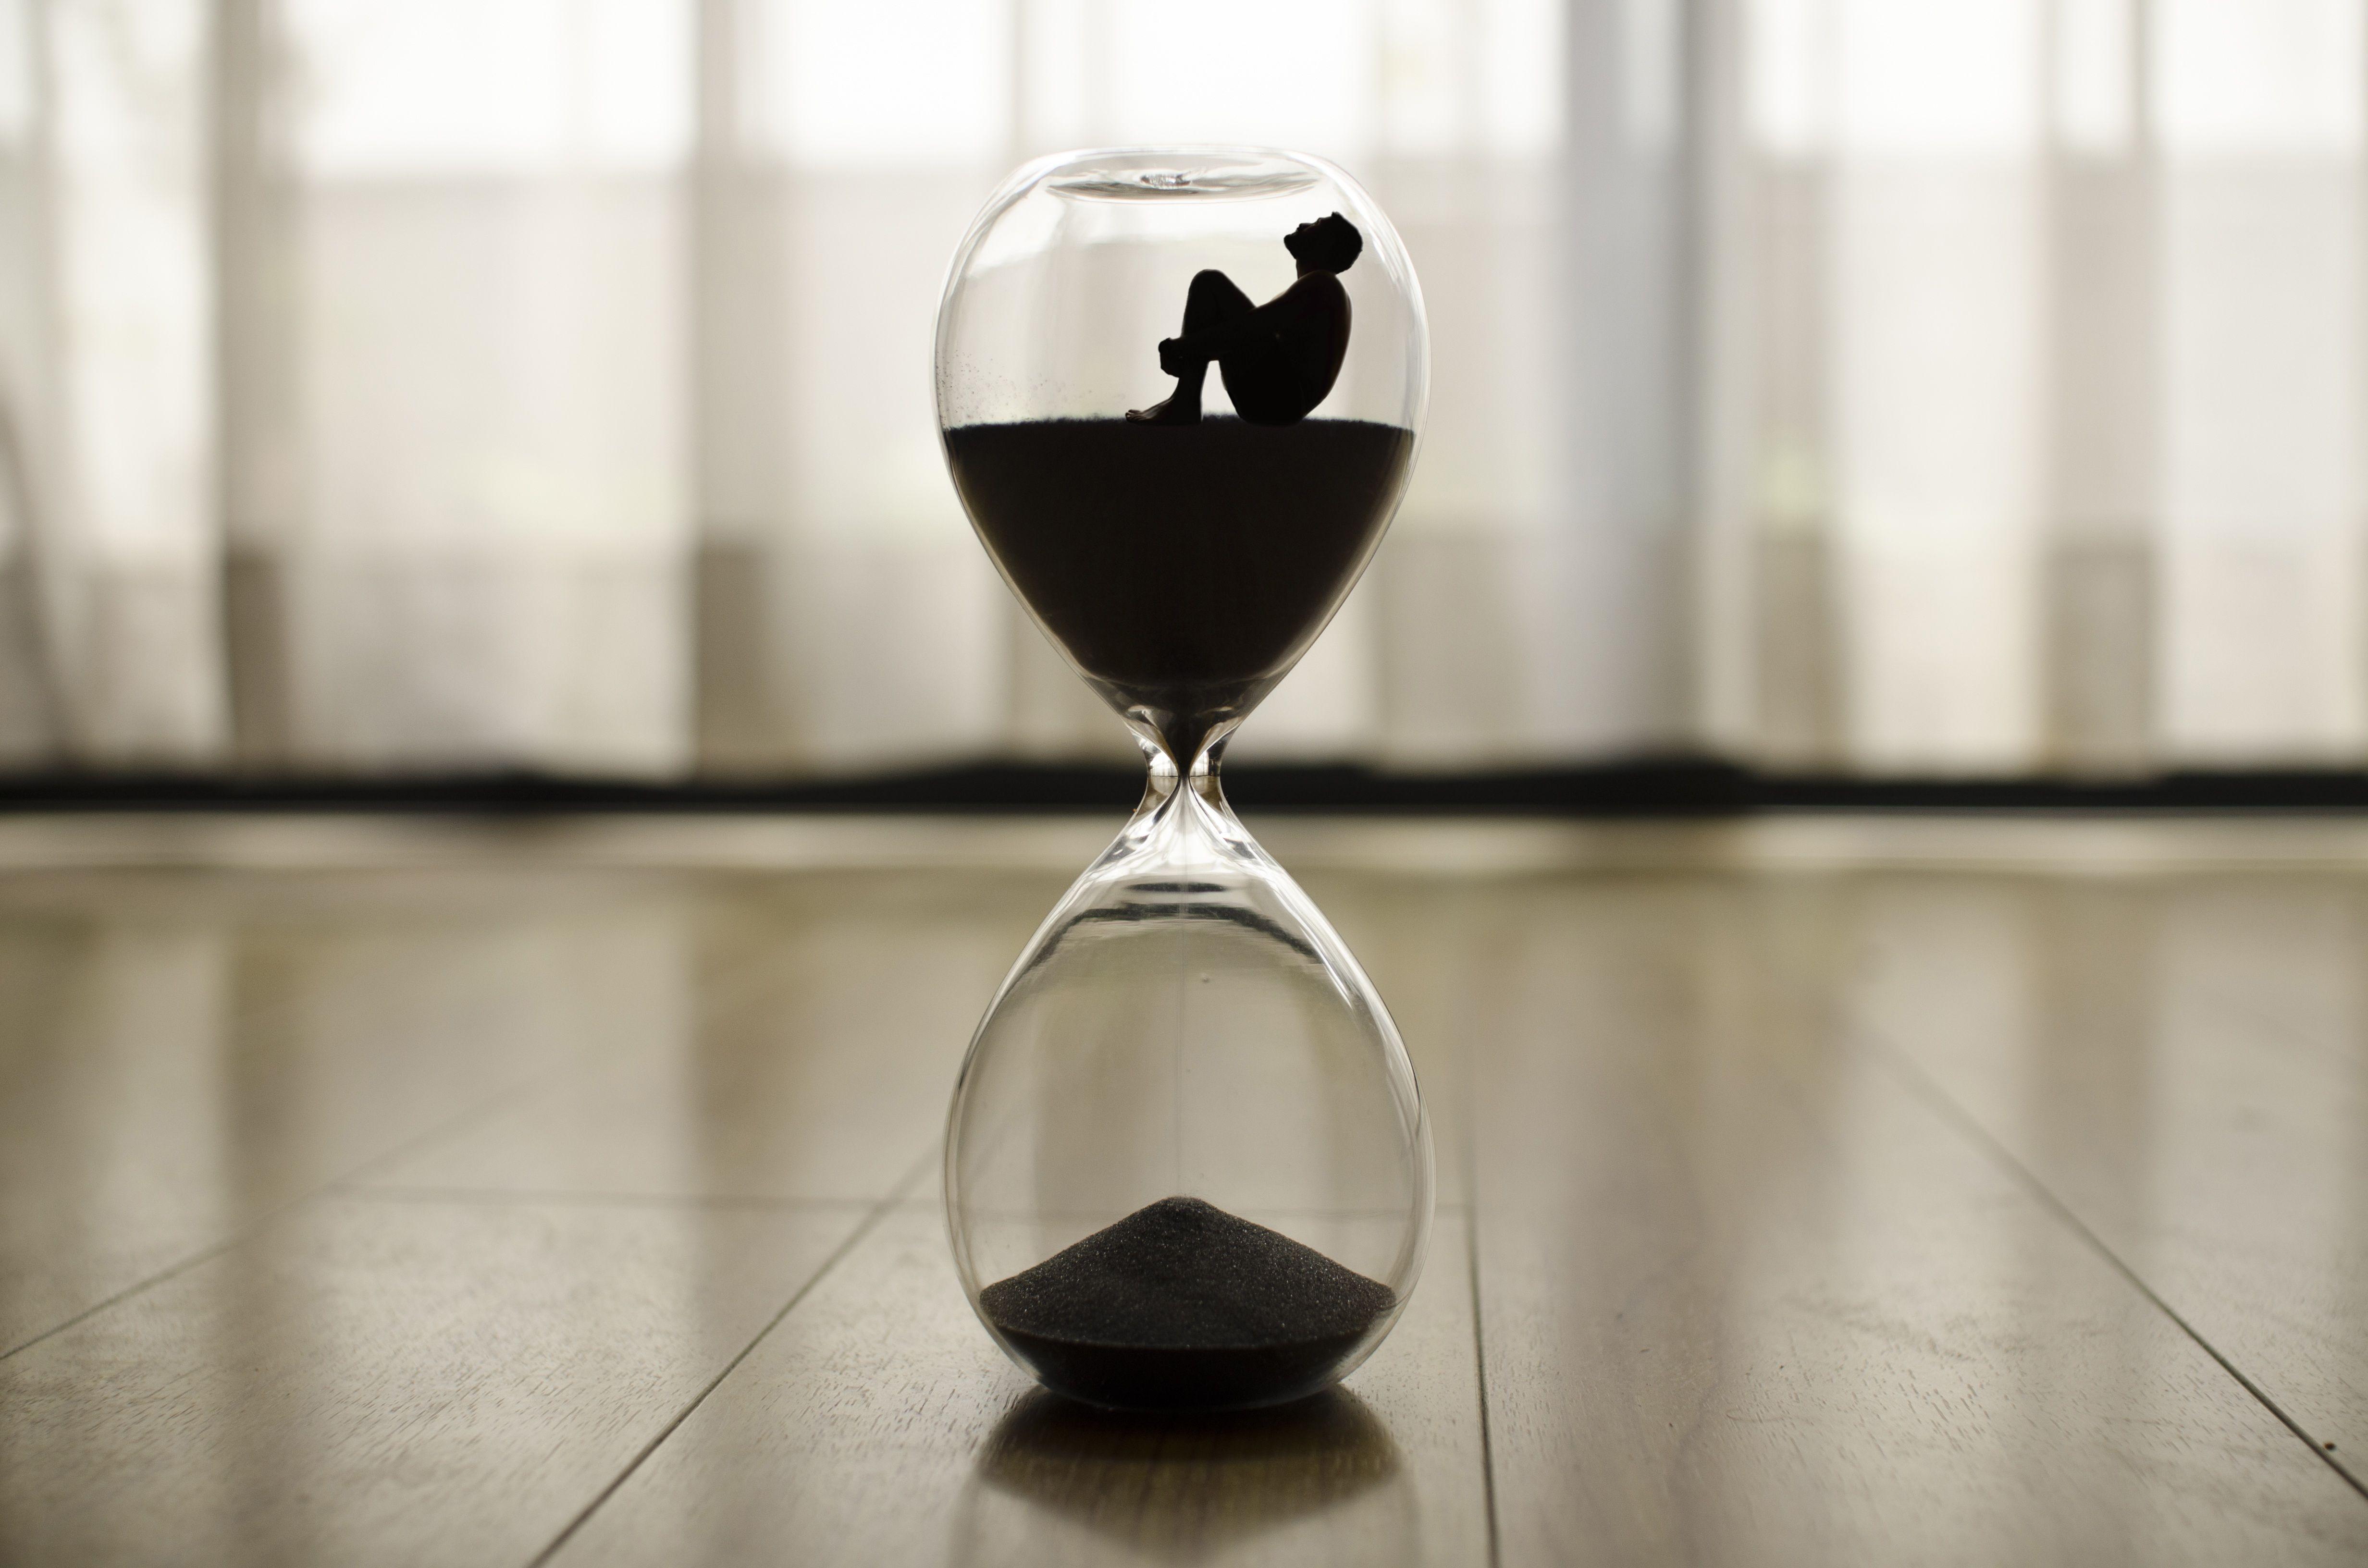 Download wallpaper 4928x3264 hourglass, man, time, loneliness HD